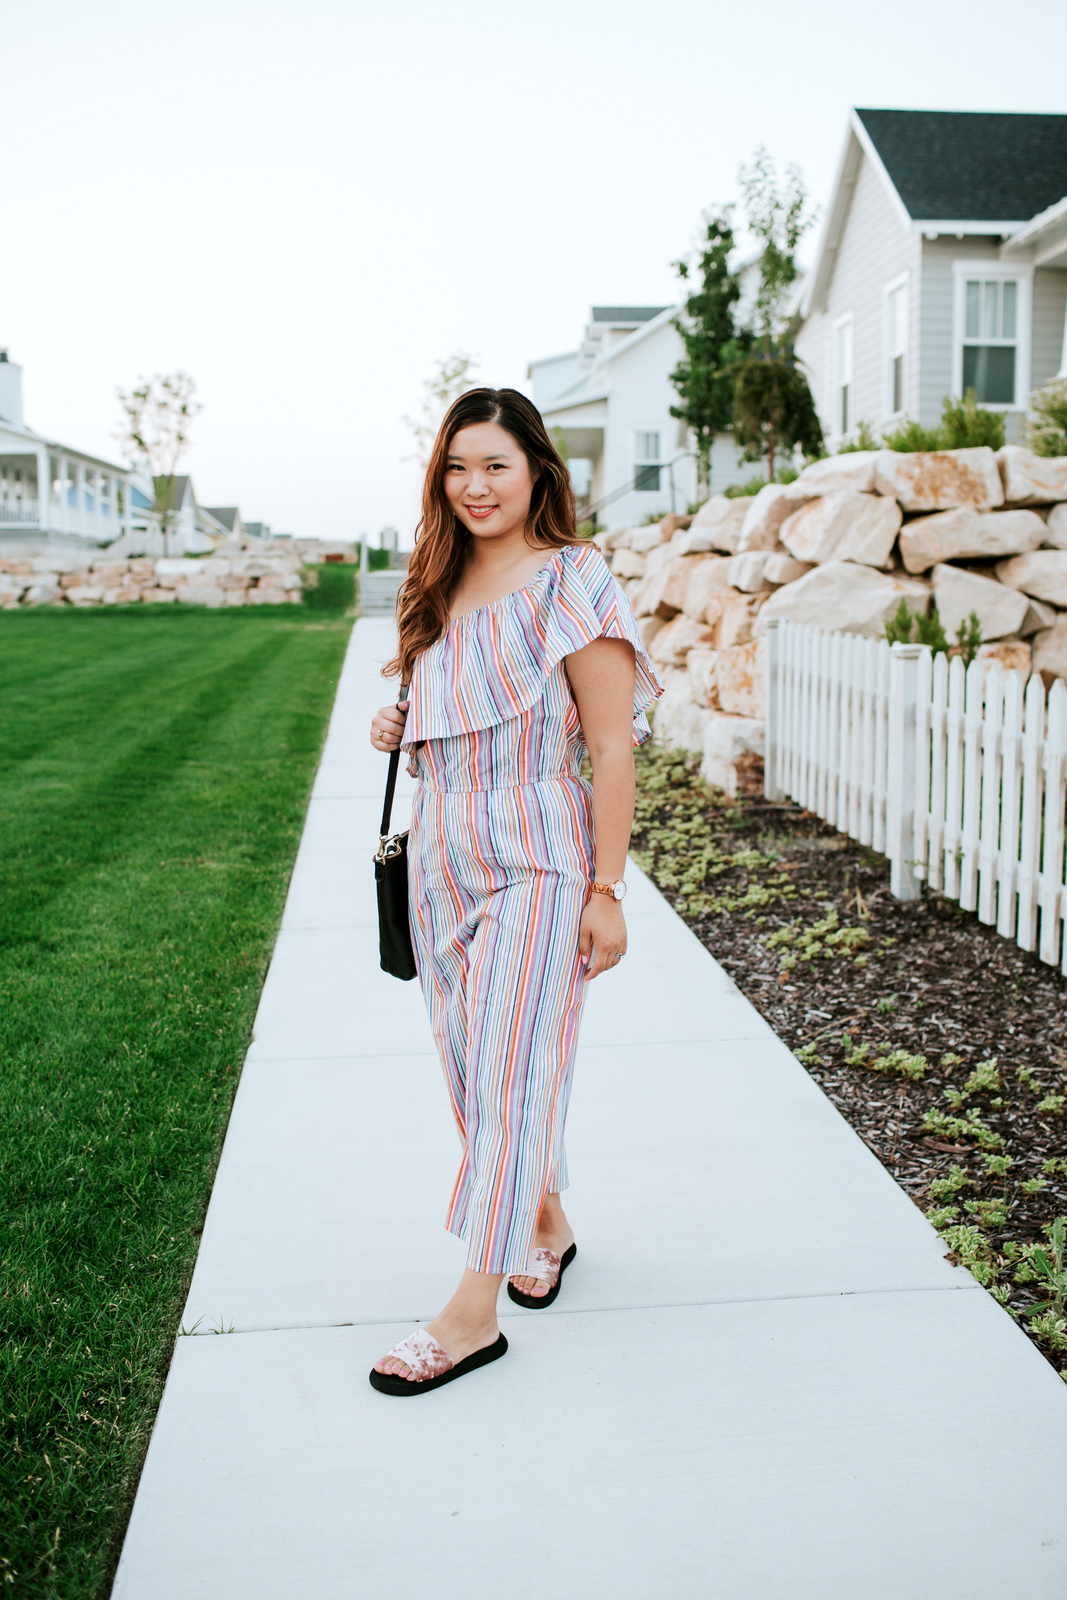 Famous Footwear Slides - Perfect For Back To School by Utah fashion blogger Sandy A La Mode